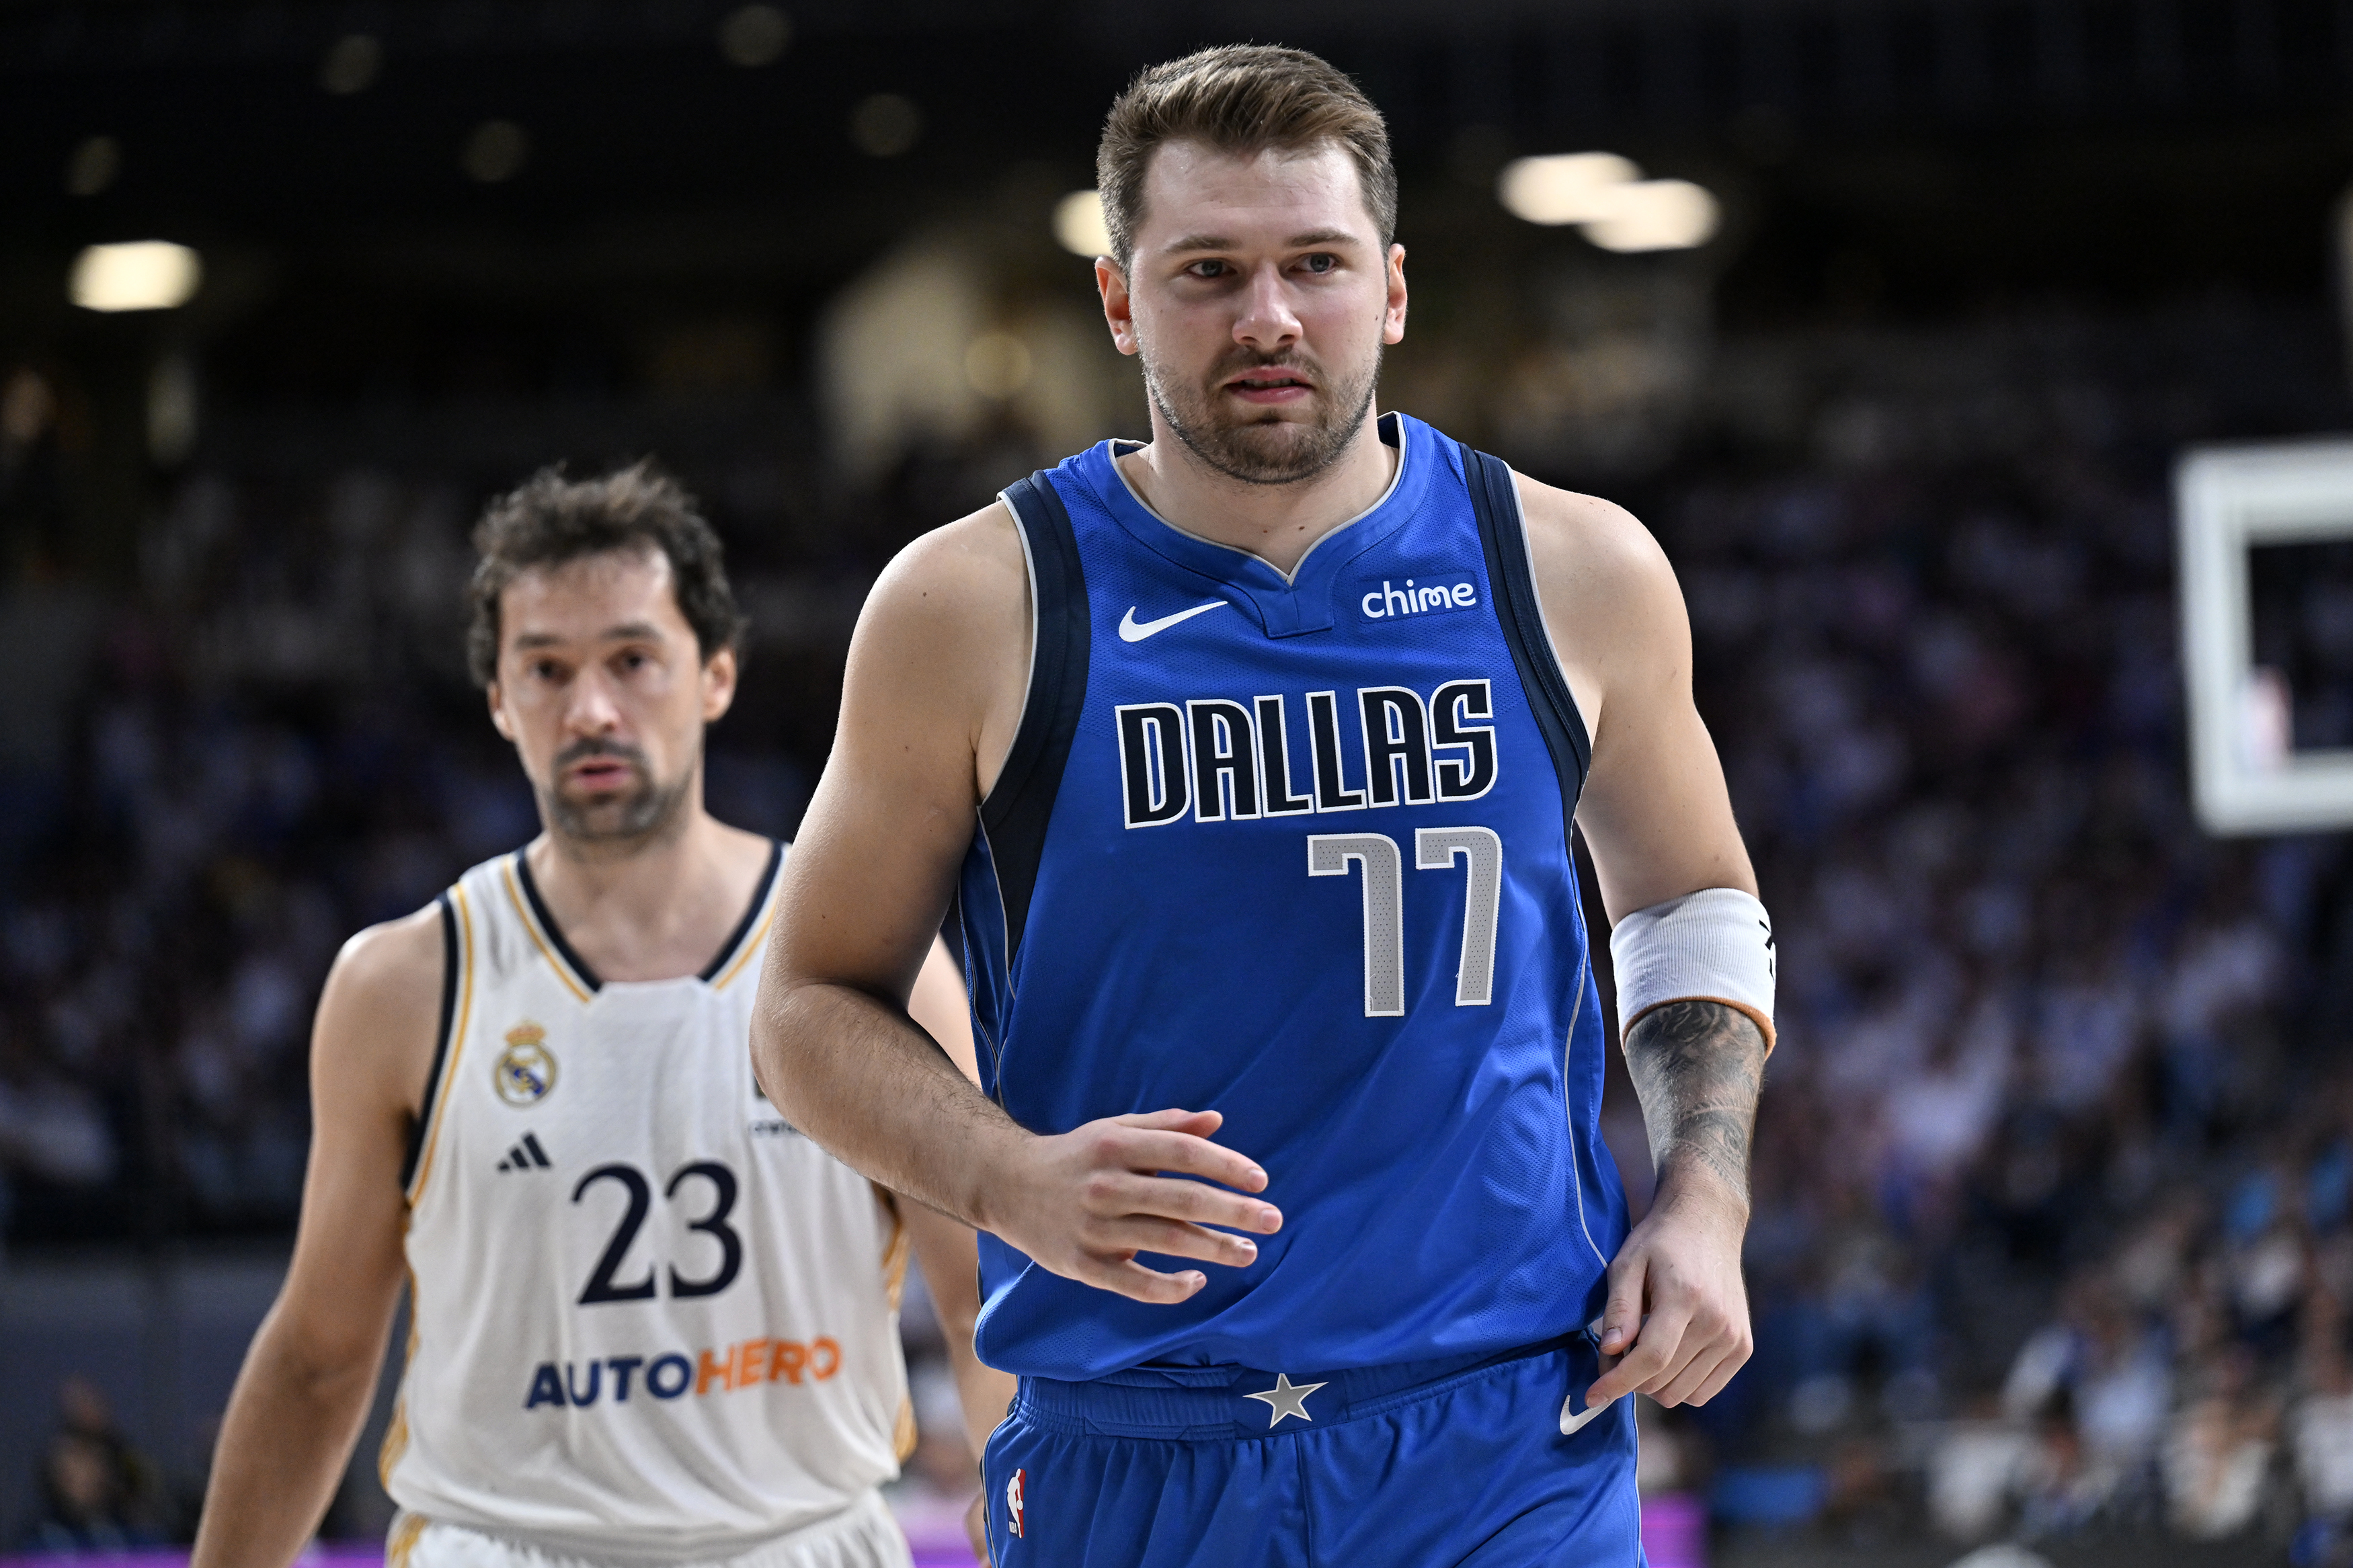 Dallas Mavericks: Luka Doncic throwback to his best plays with Slovenia